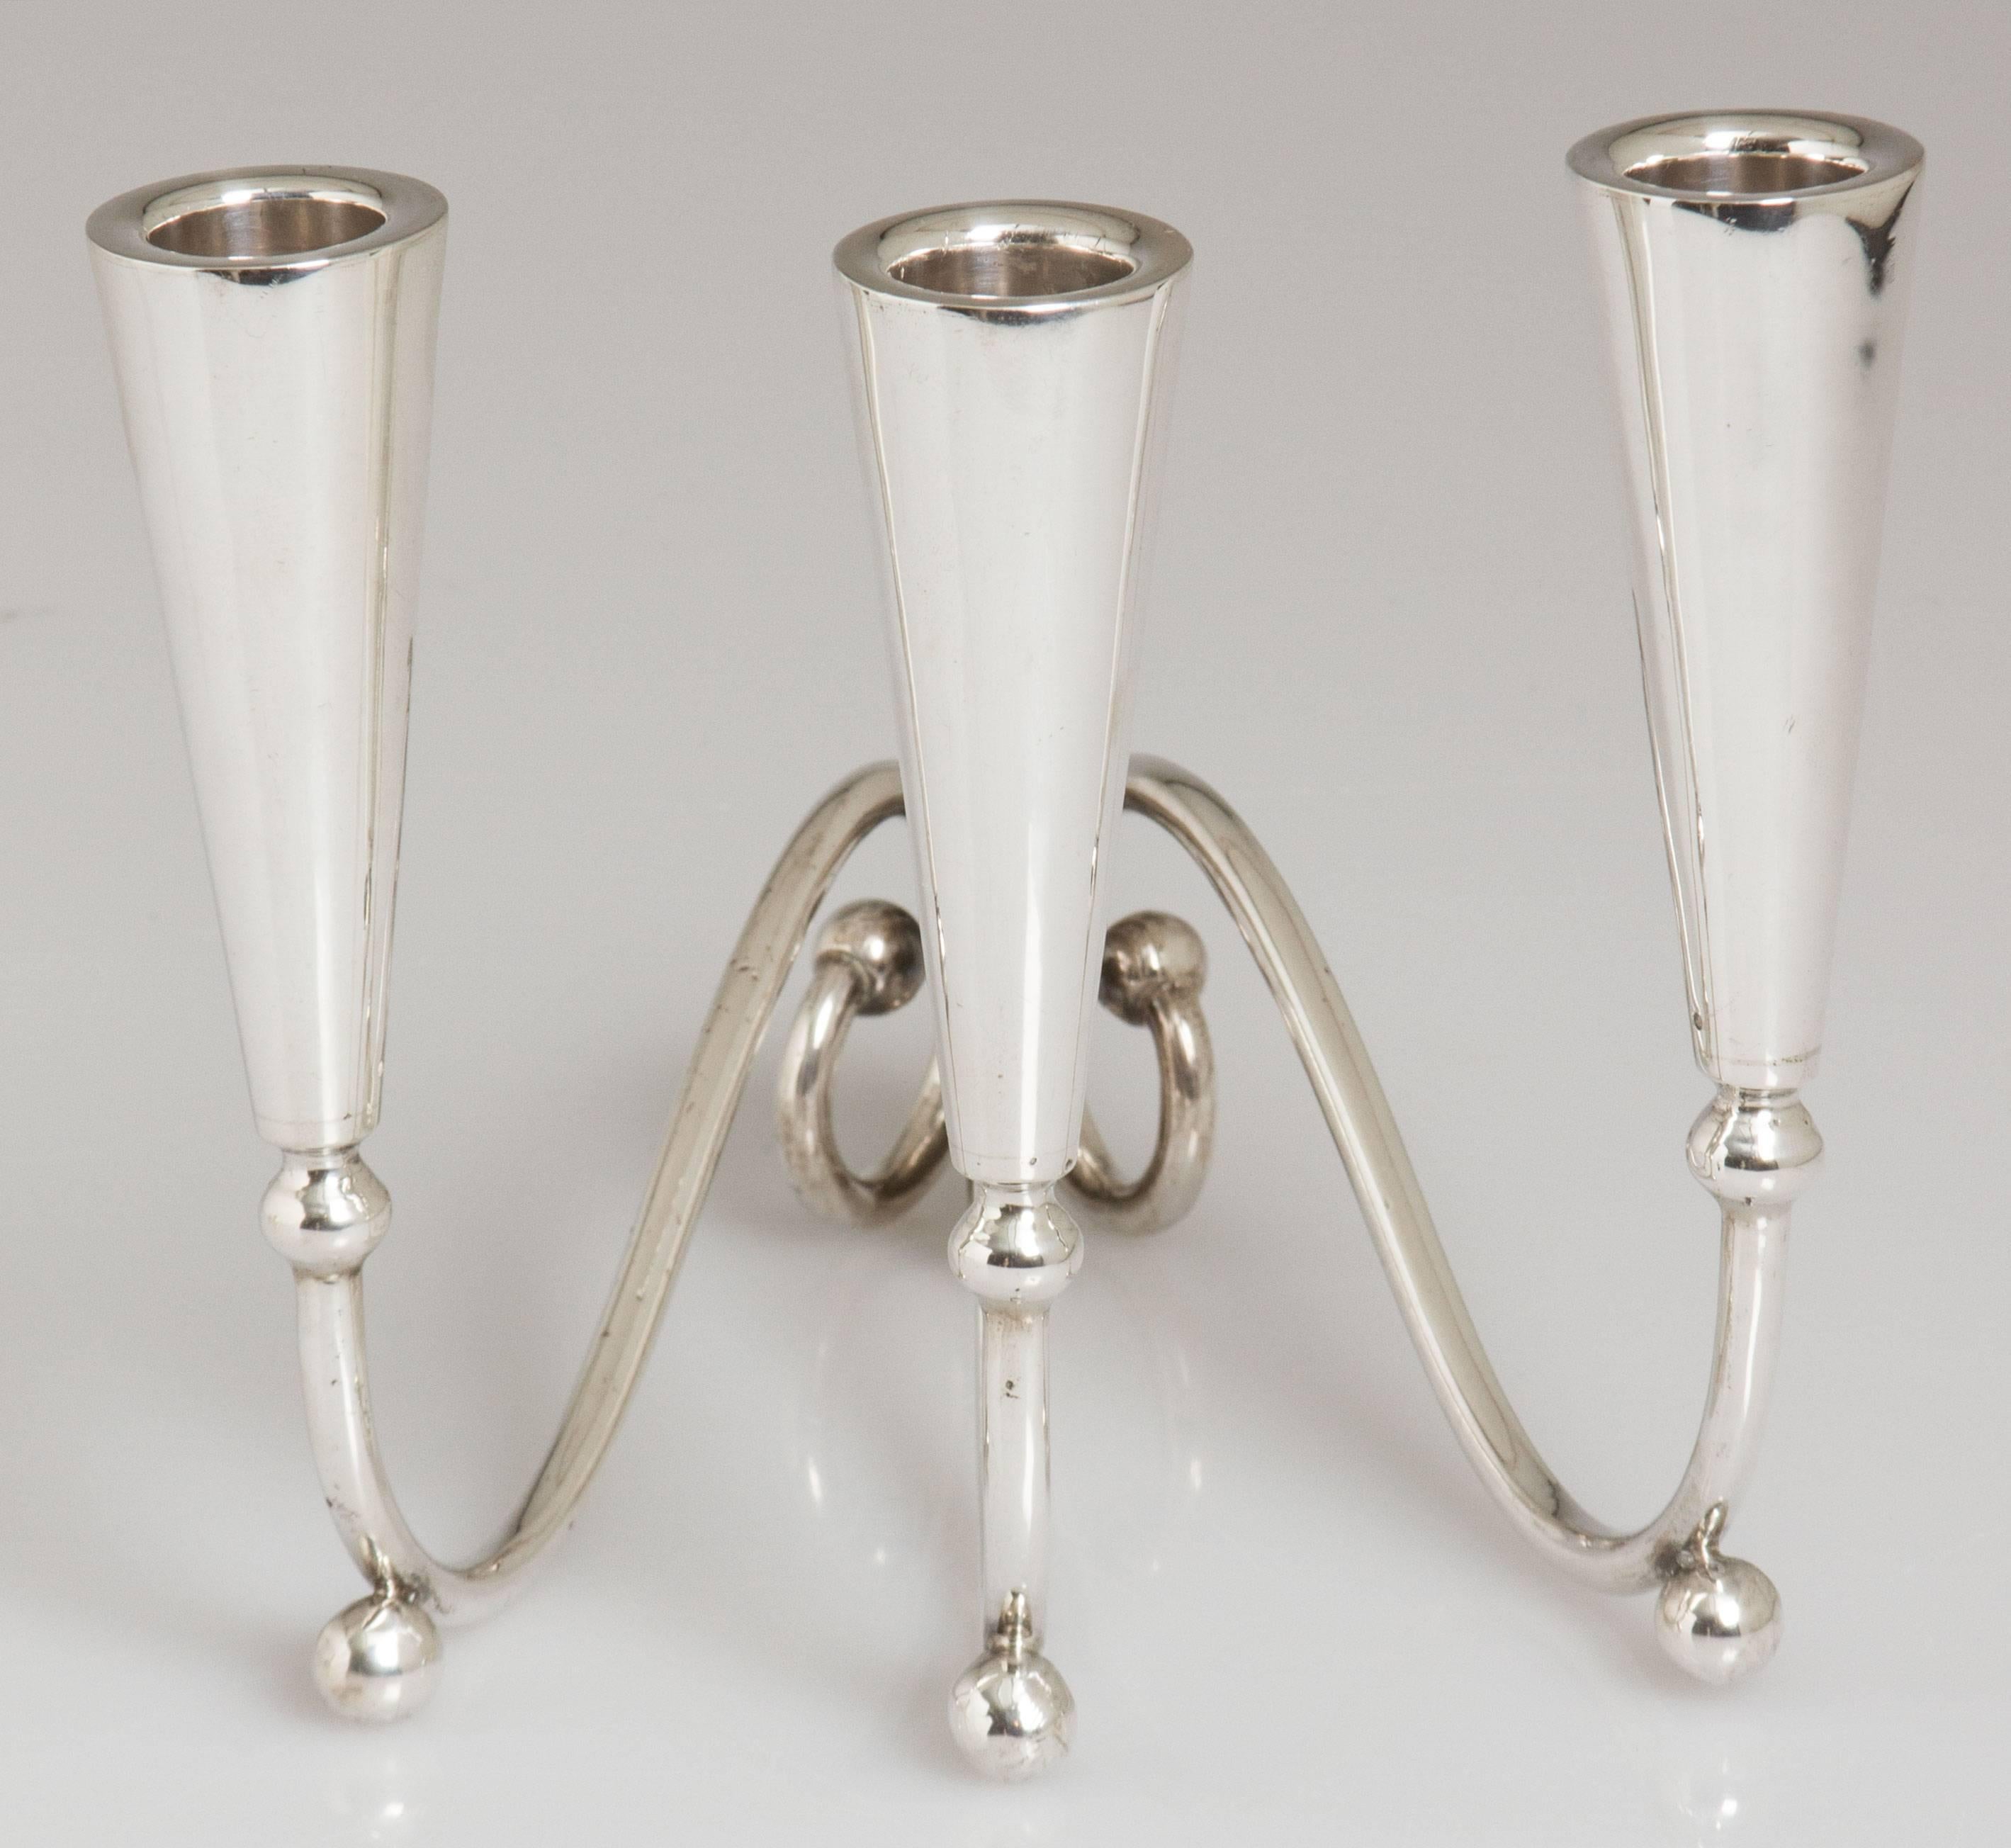 Mexican Mid-Century Modernist Pair of Sterling Silver Candleabras